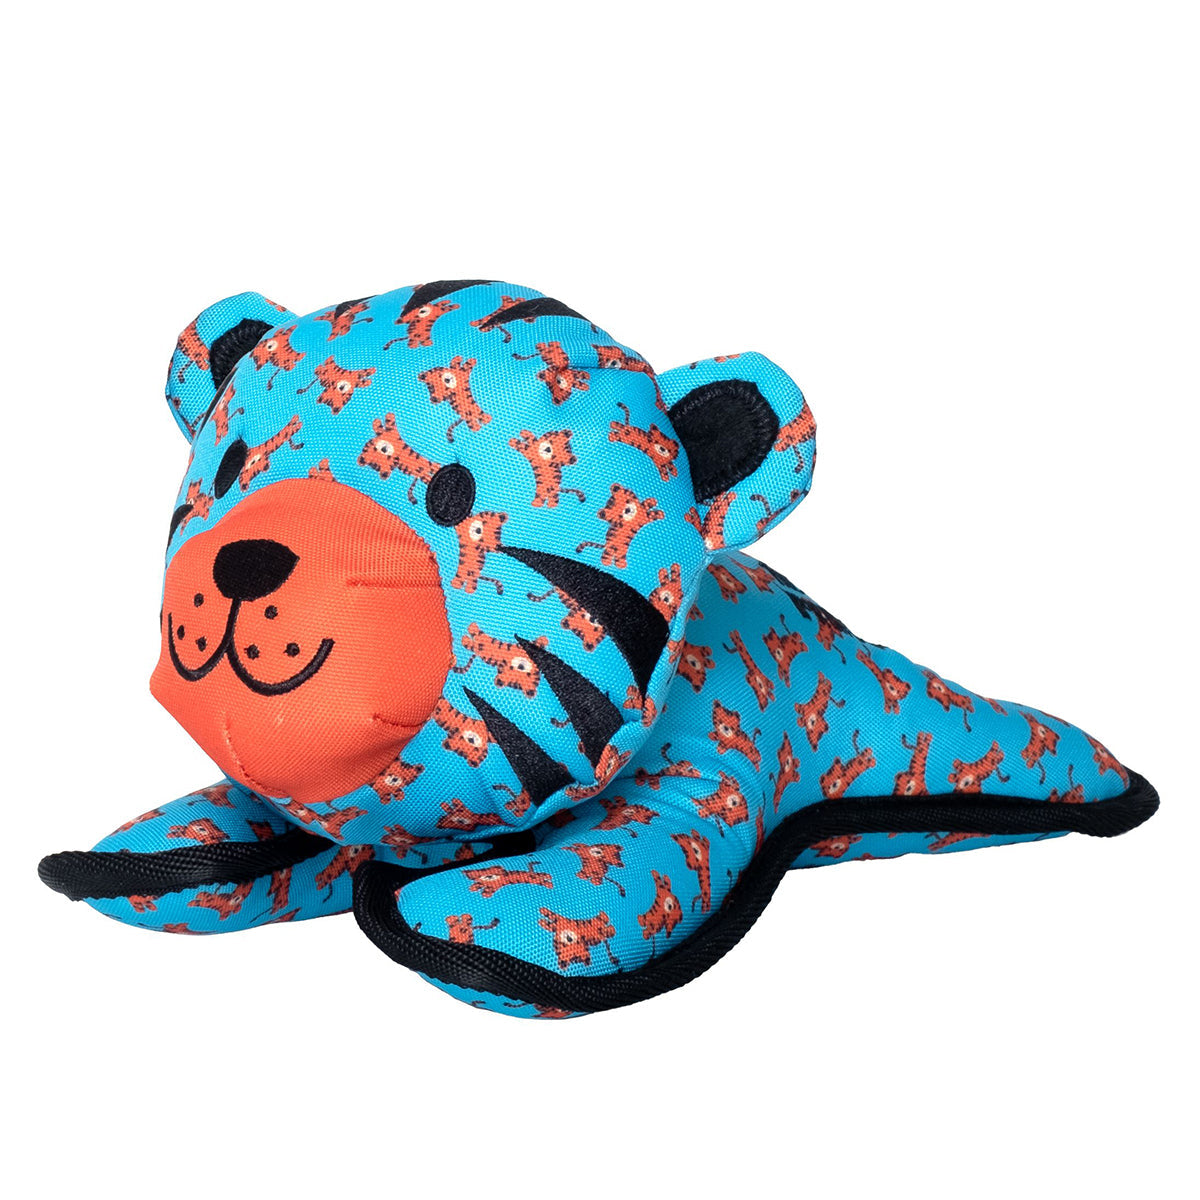 The Worthy Dog Tiger Toy